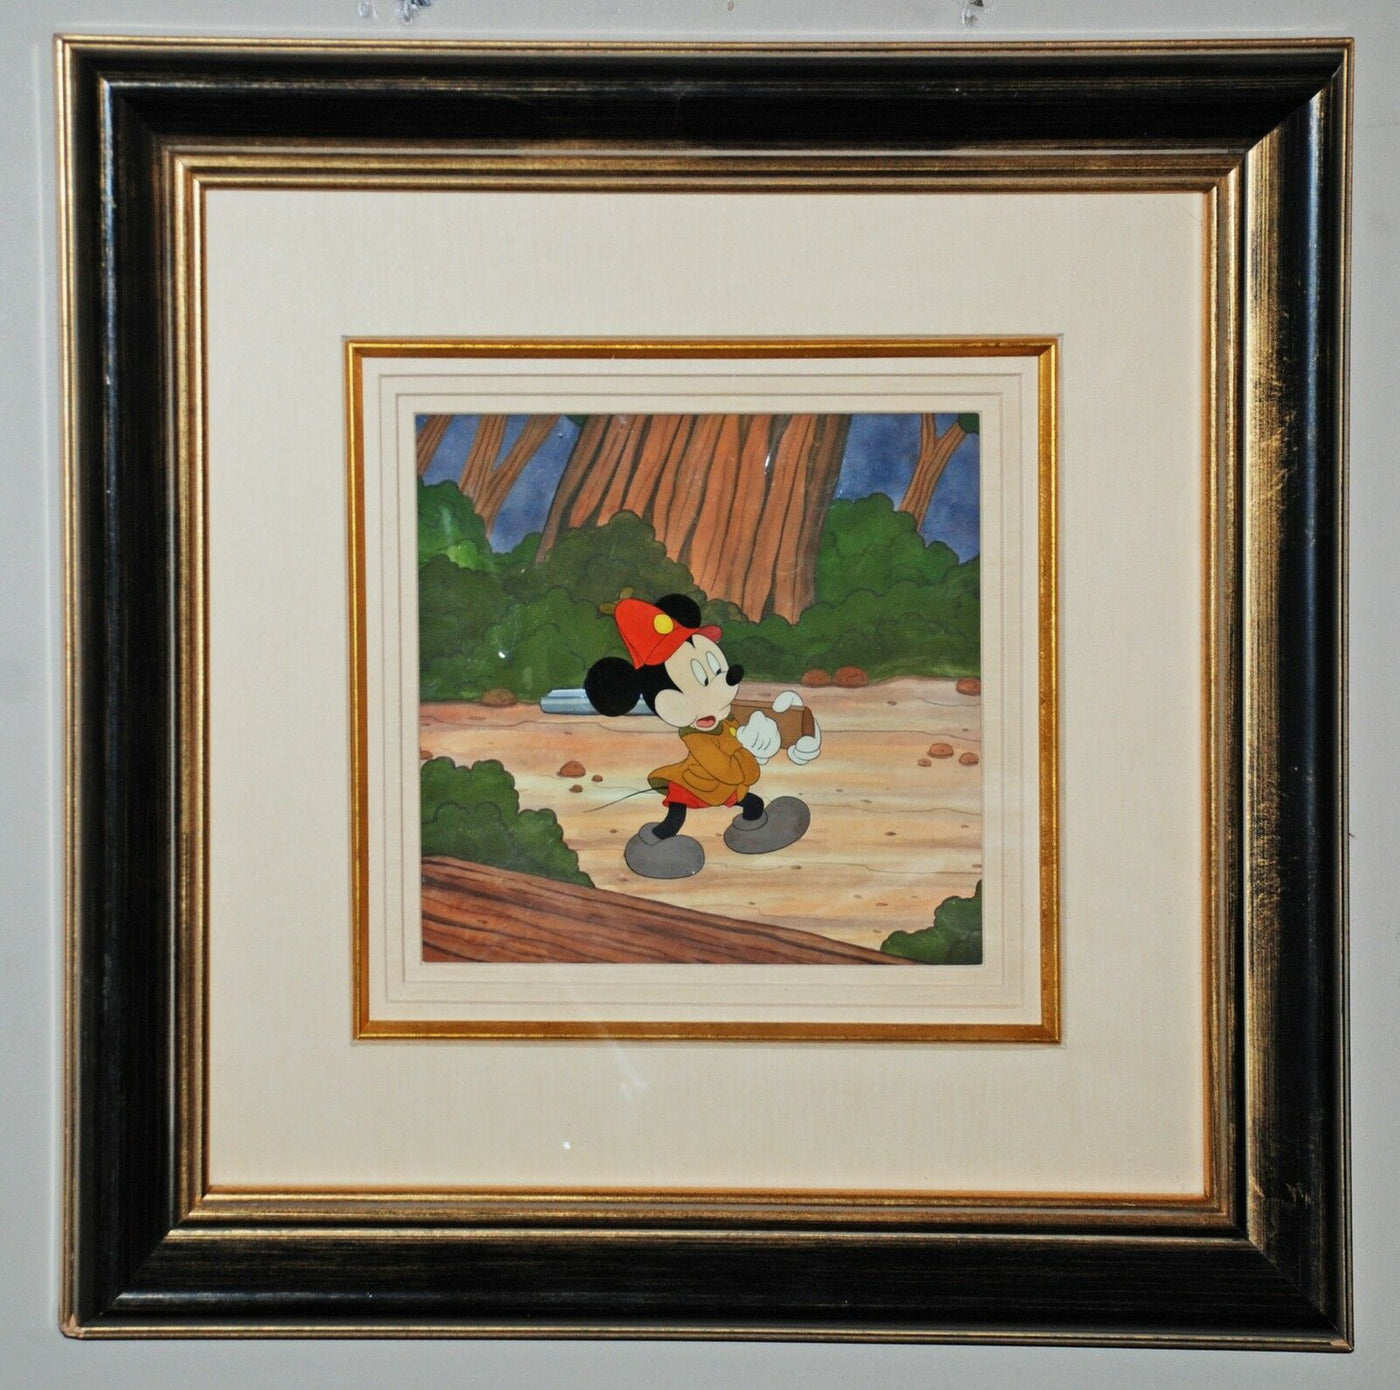 Original Walt Disney Production Cel on a color copy background from The Pointer